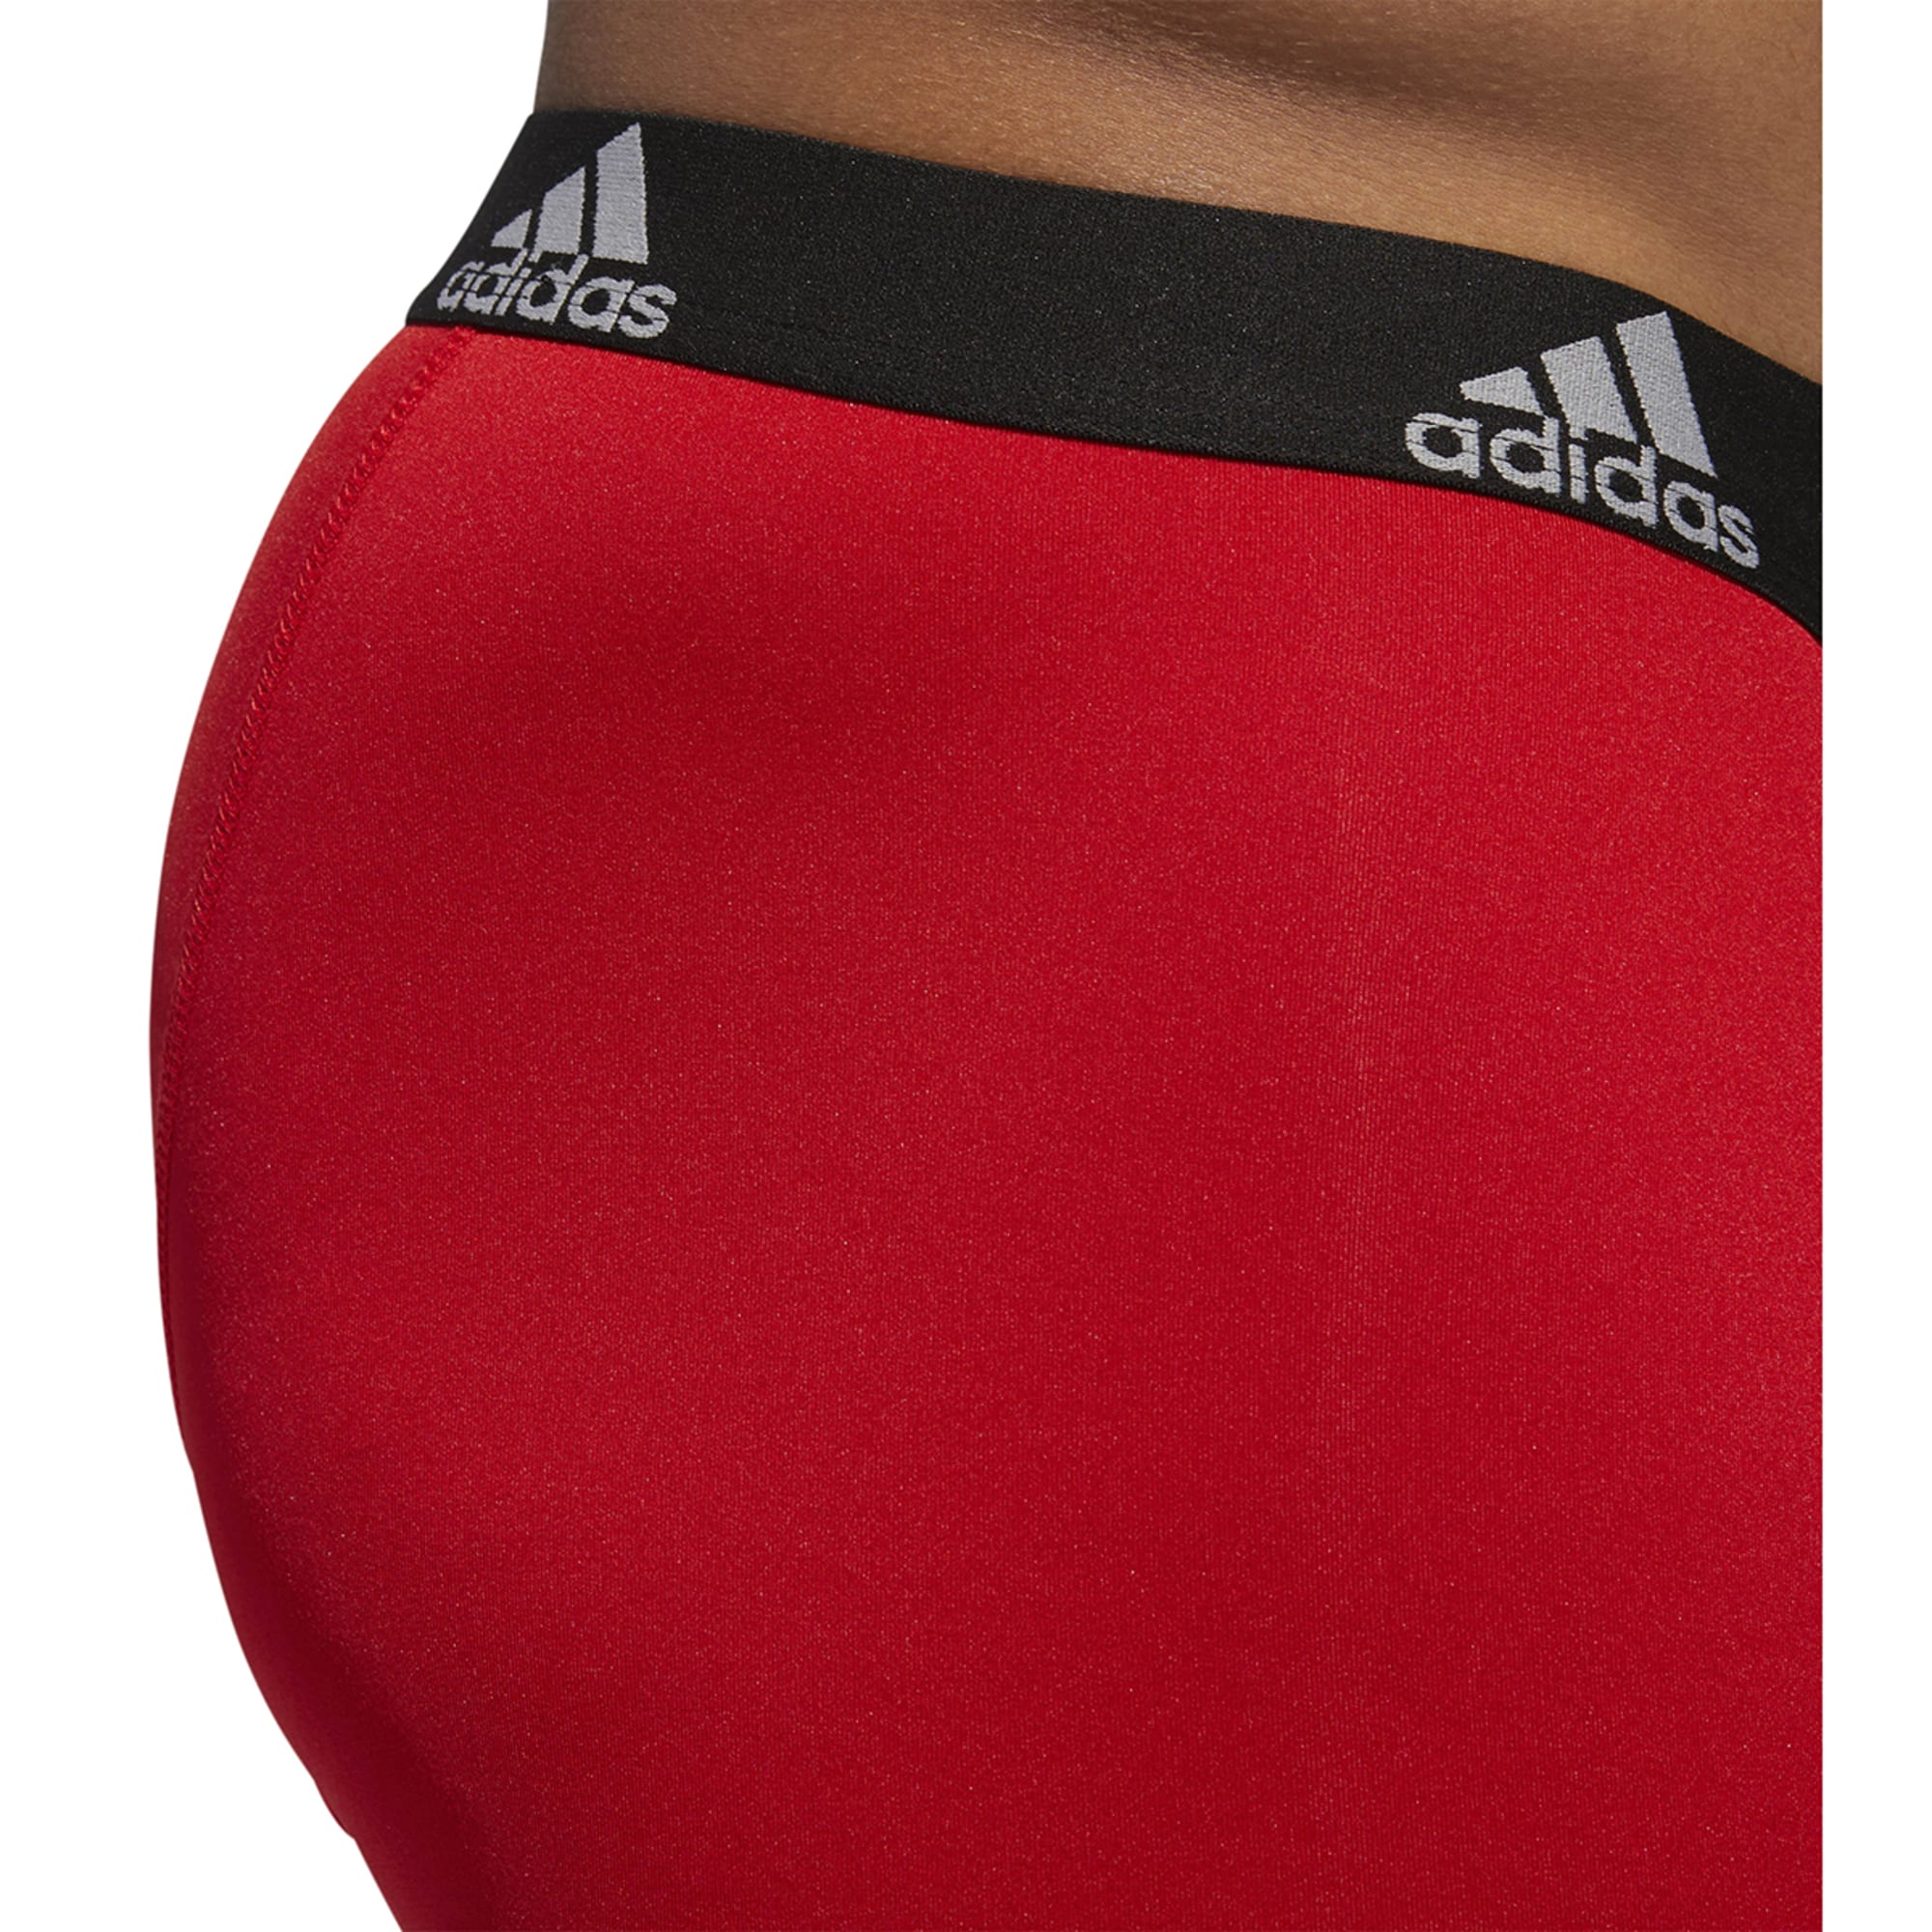 adidas Men's Sport Performance 2-Pack Boxer Brief, Real Red/Black